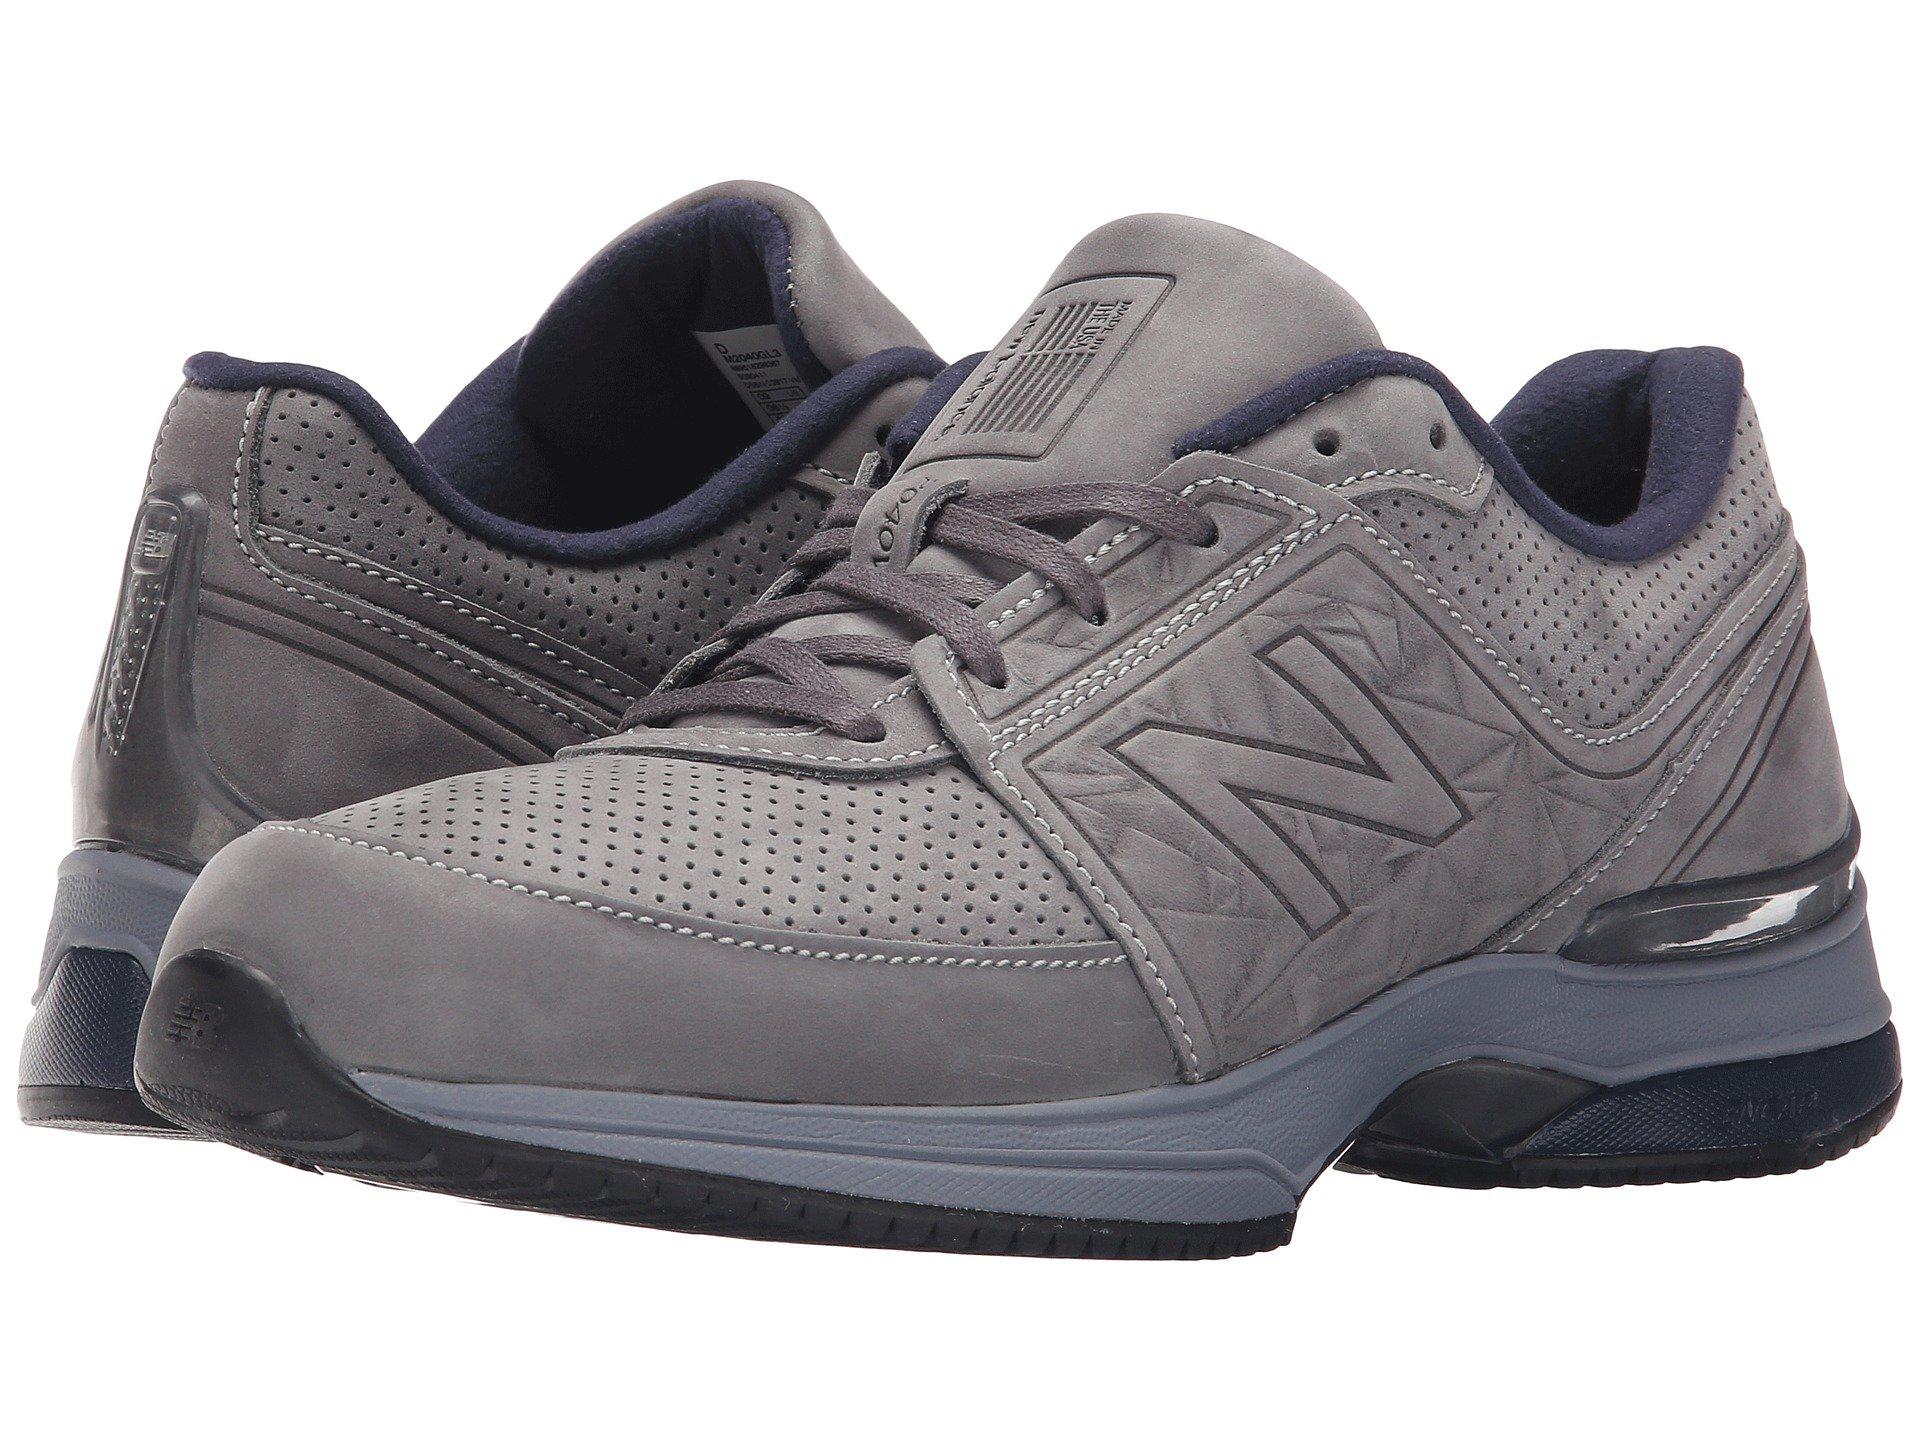 New Balance Leather M2040 in Grey/Navy (Gray) for Men - Lyst